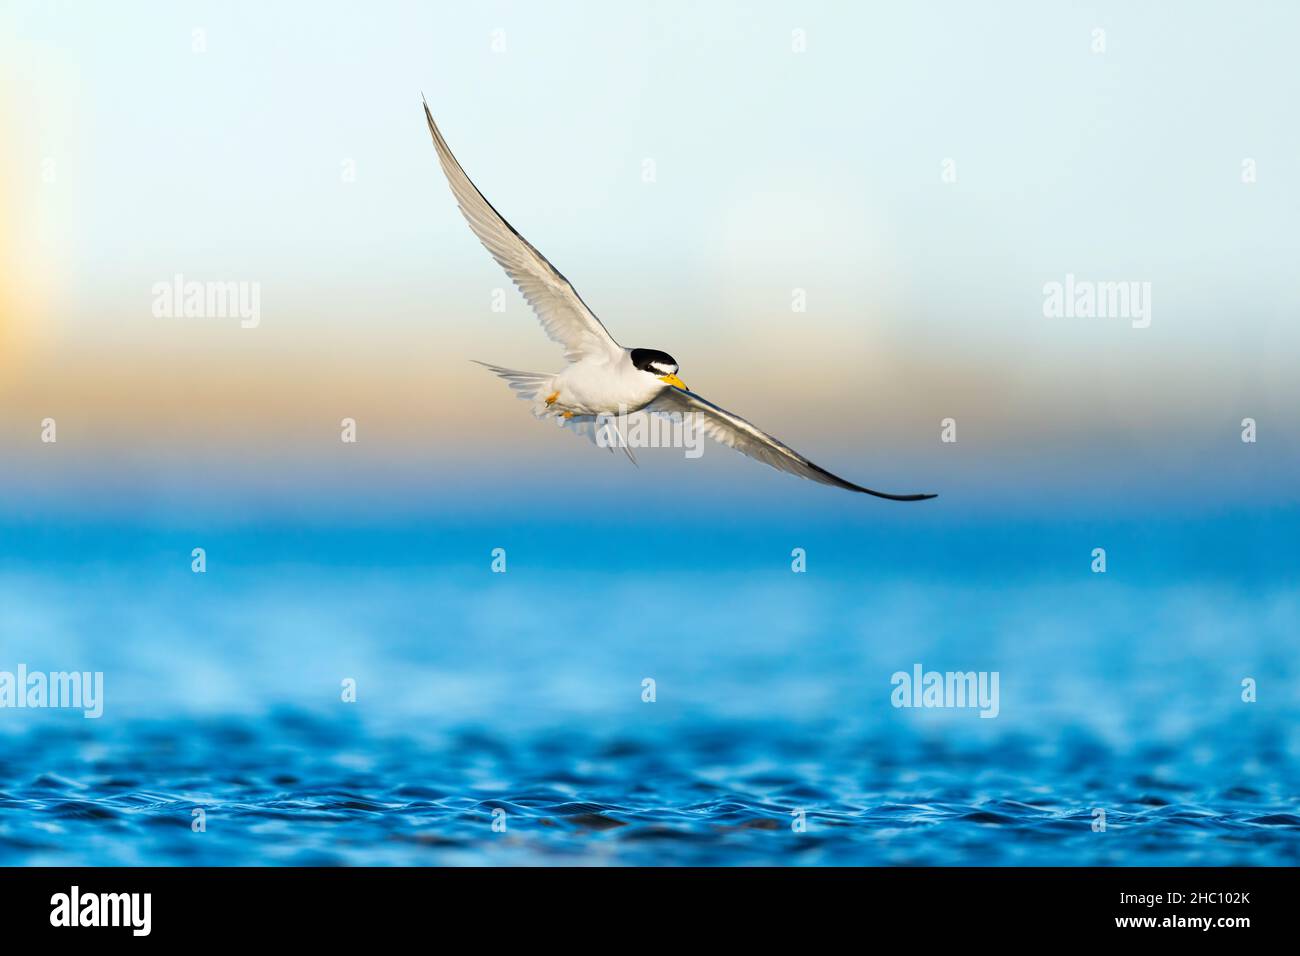 An adult Least Tern (Sternula antillarum) with its wings widespread as it is flying low above the water New York, USA Stock Photo